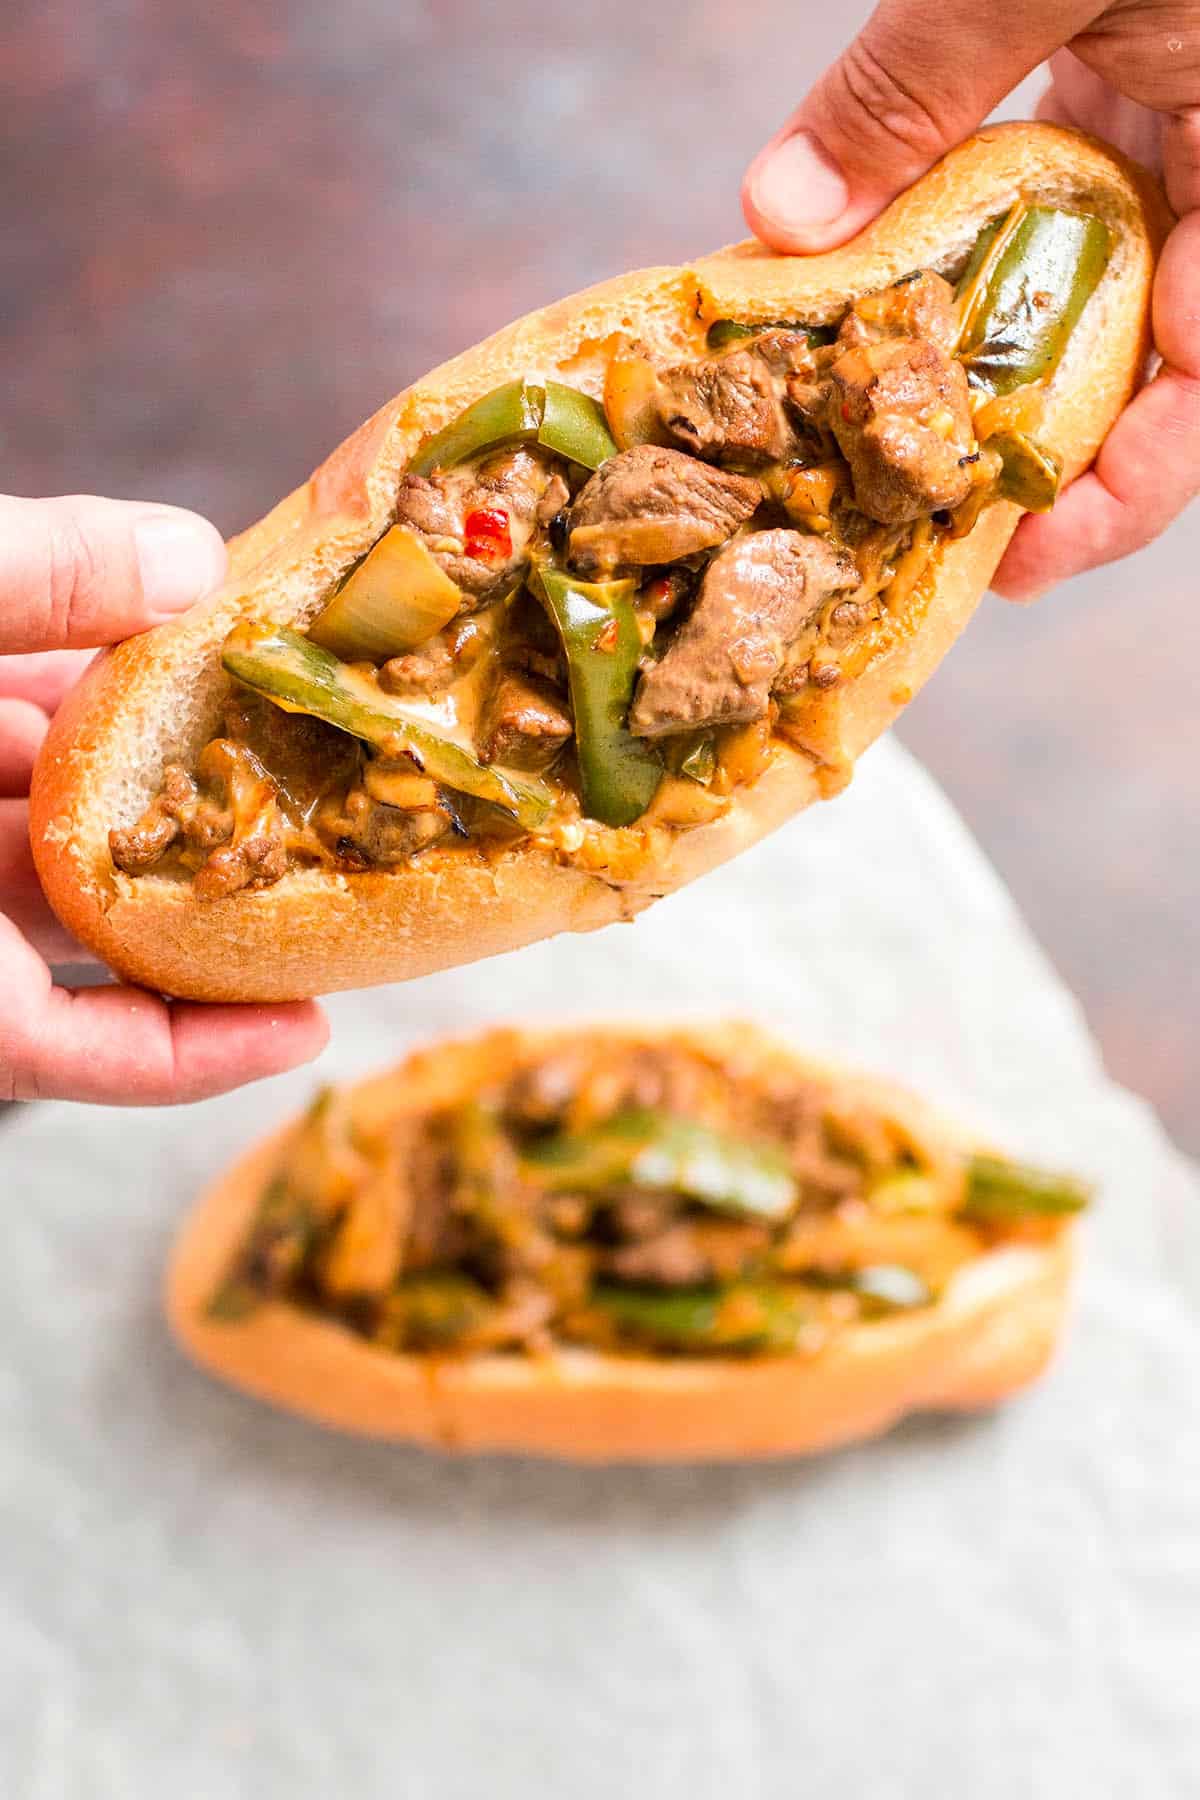 One of the messiest Mexi Cheesesteak Sandwiches ever